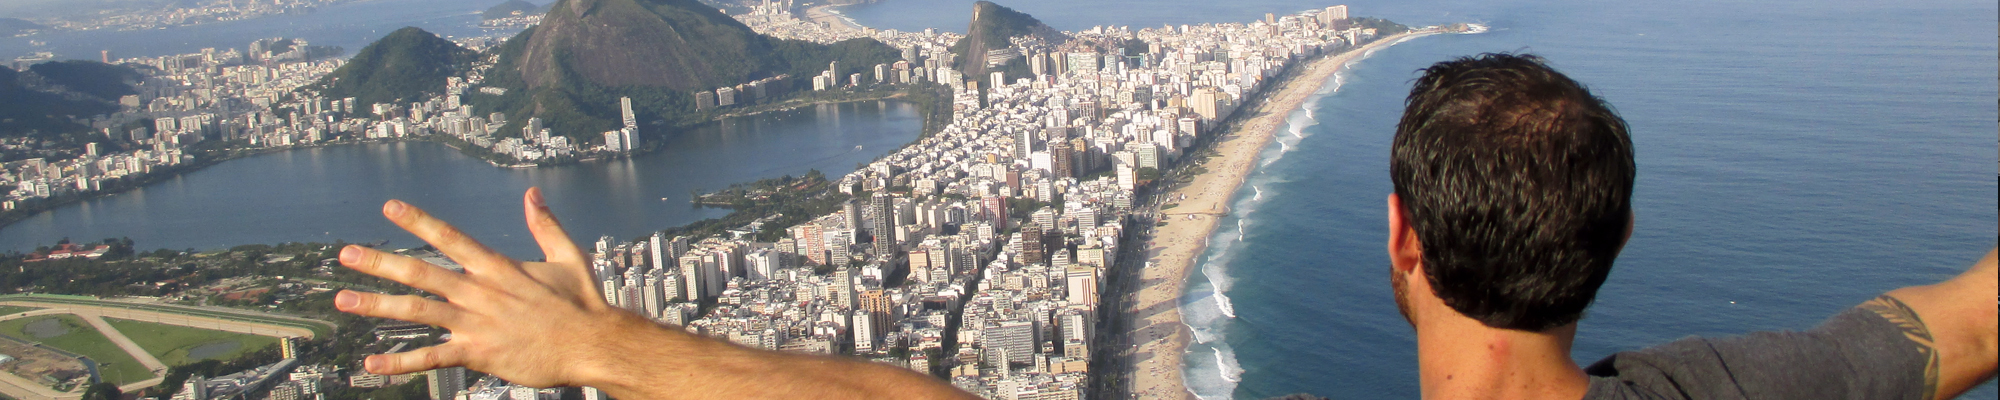 student in Brazil, on mountain with arms open wide